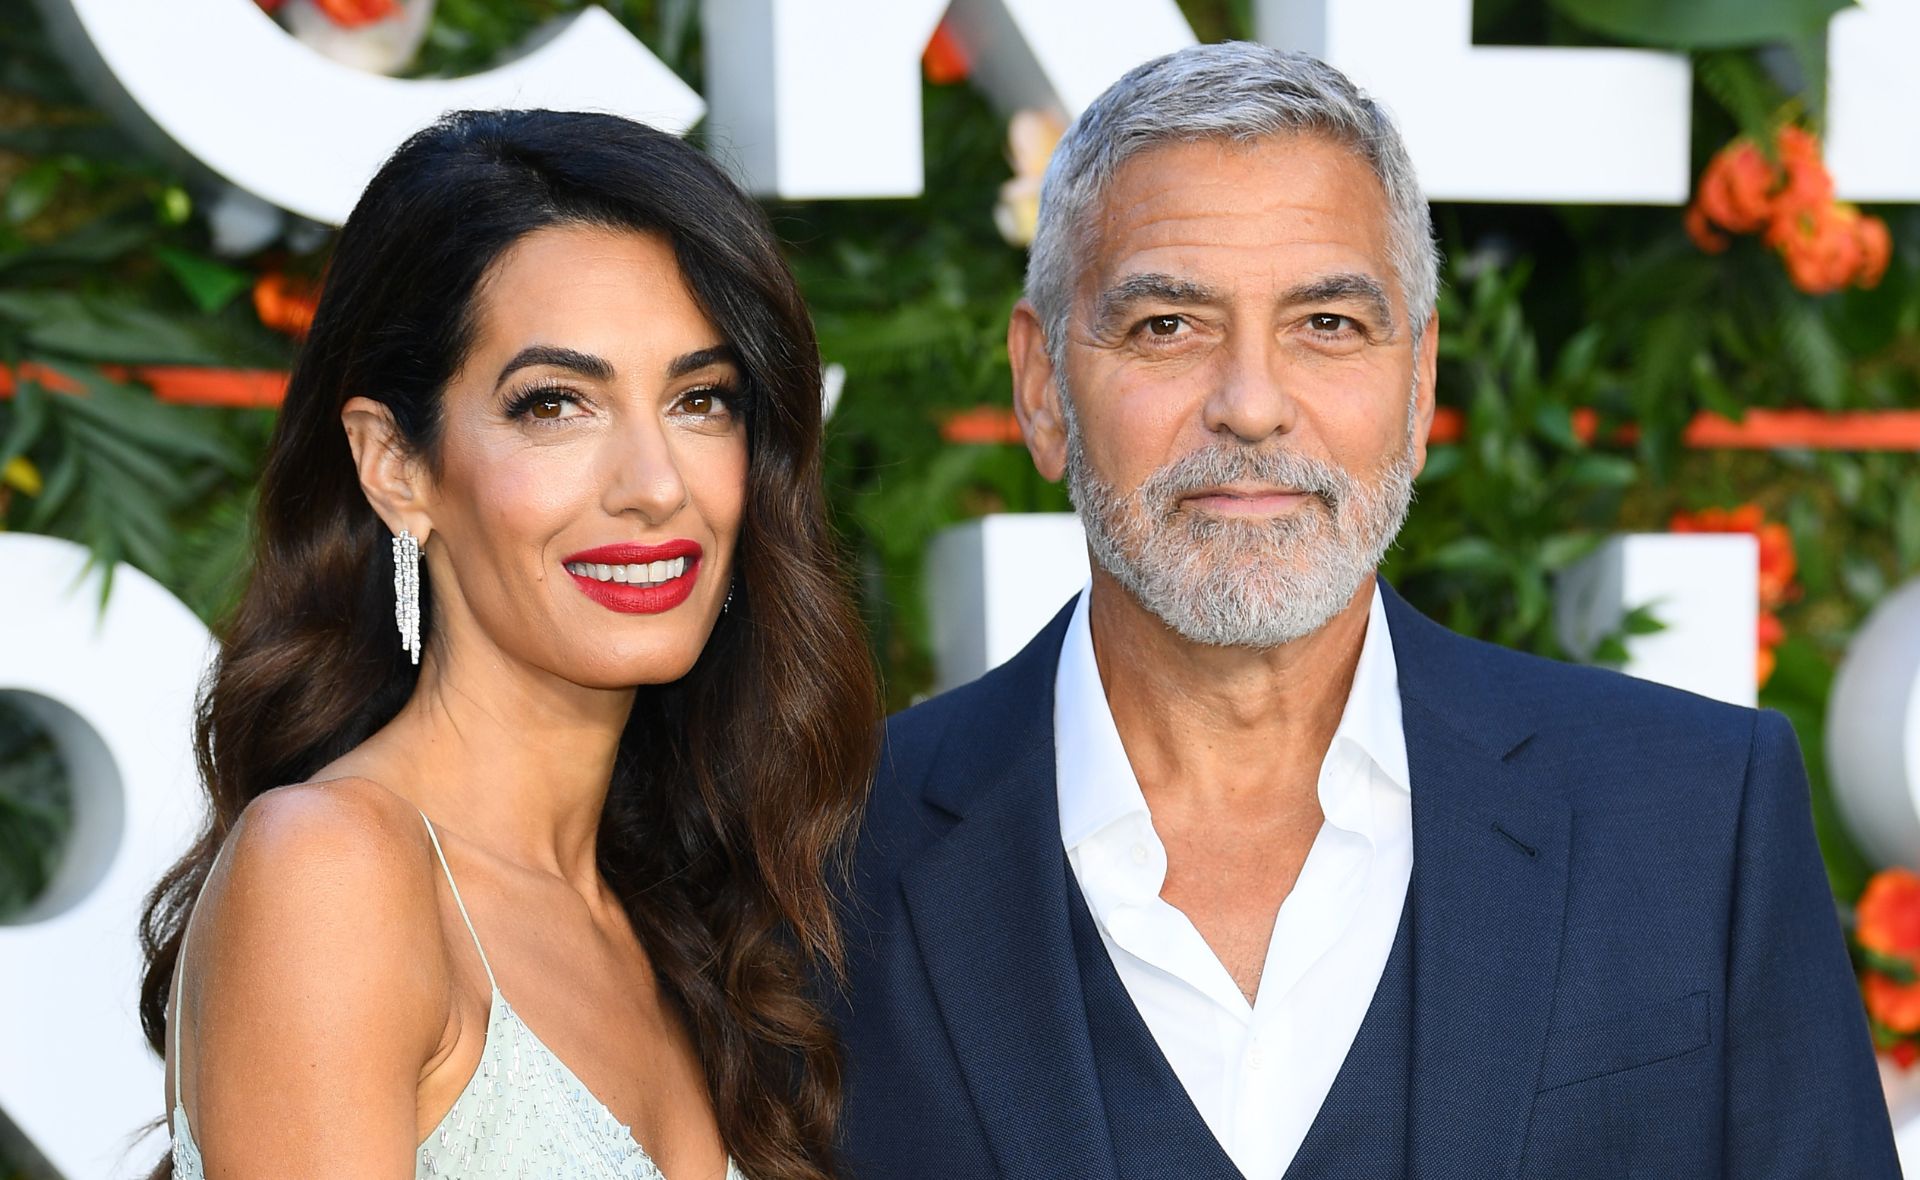 George Clooney and wife Amal reportedly renew their vows in Italy